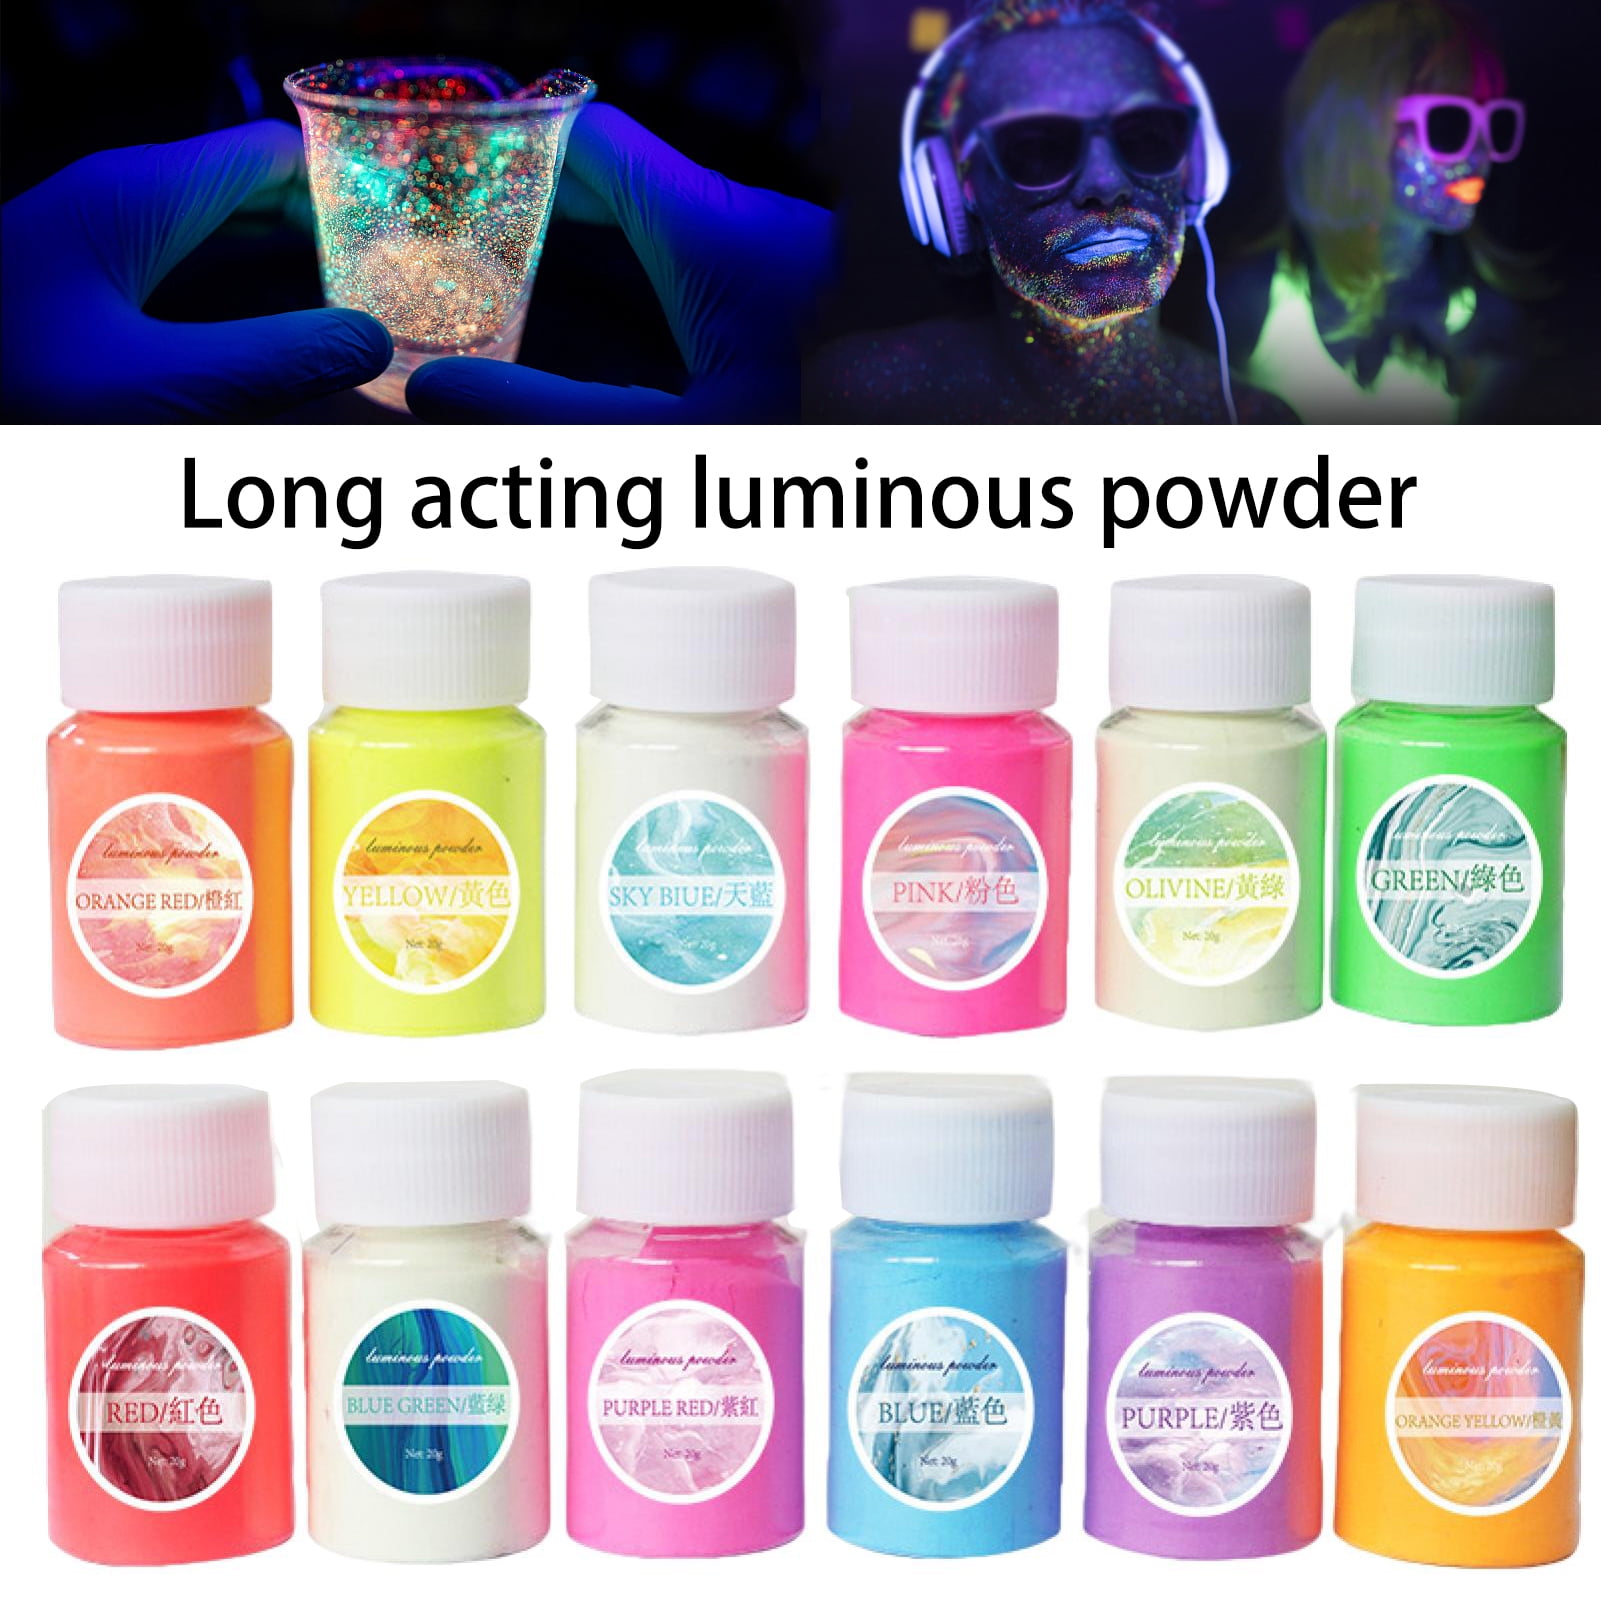 UV Glow Blacklight Face and Body Paint Set of 8 Tubes, Neon